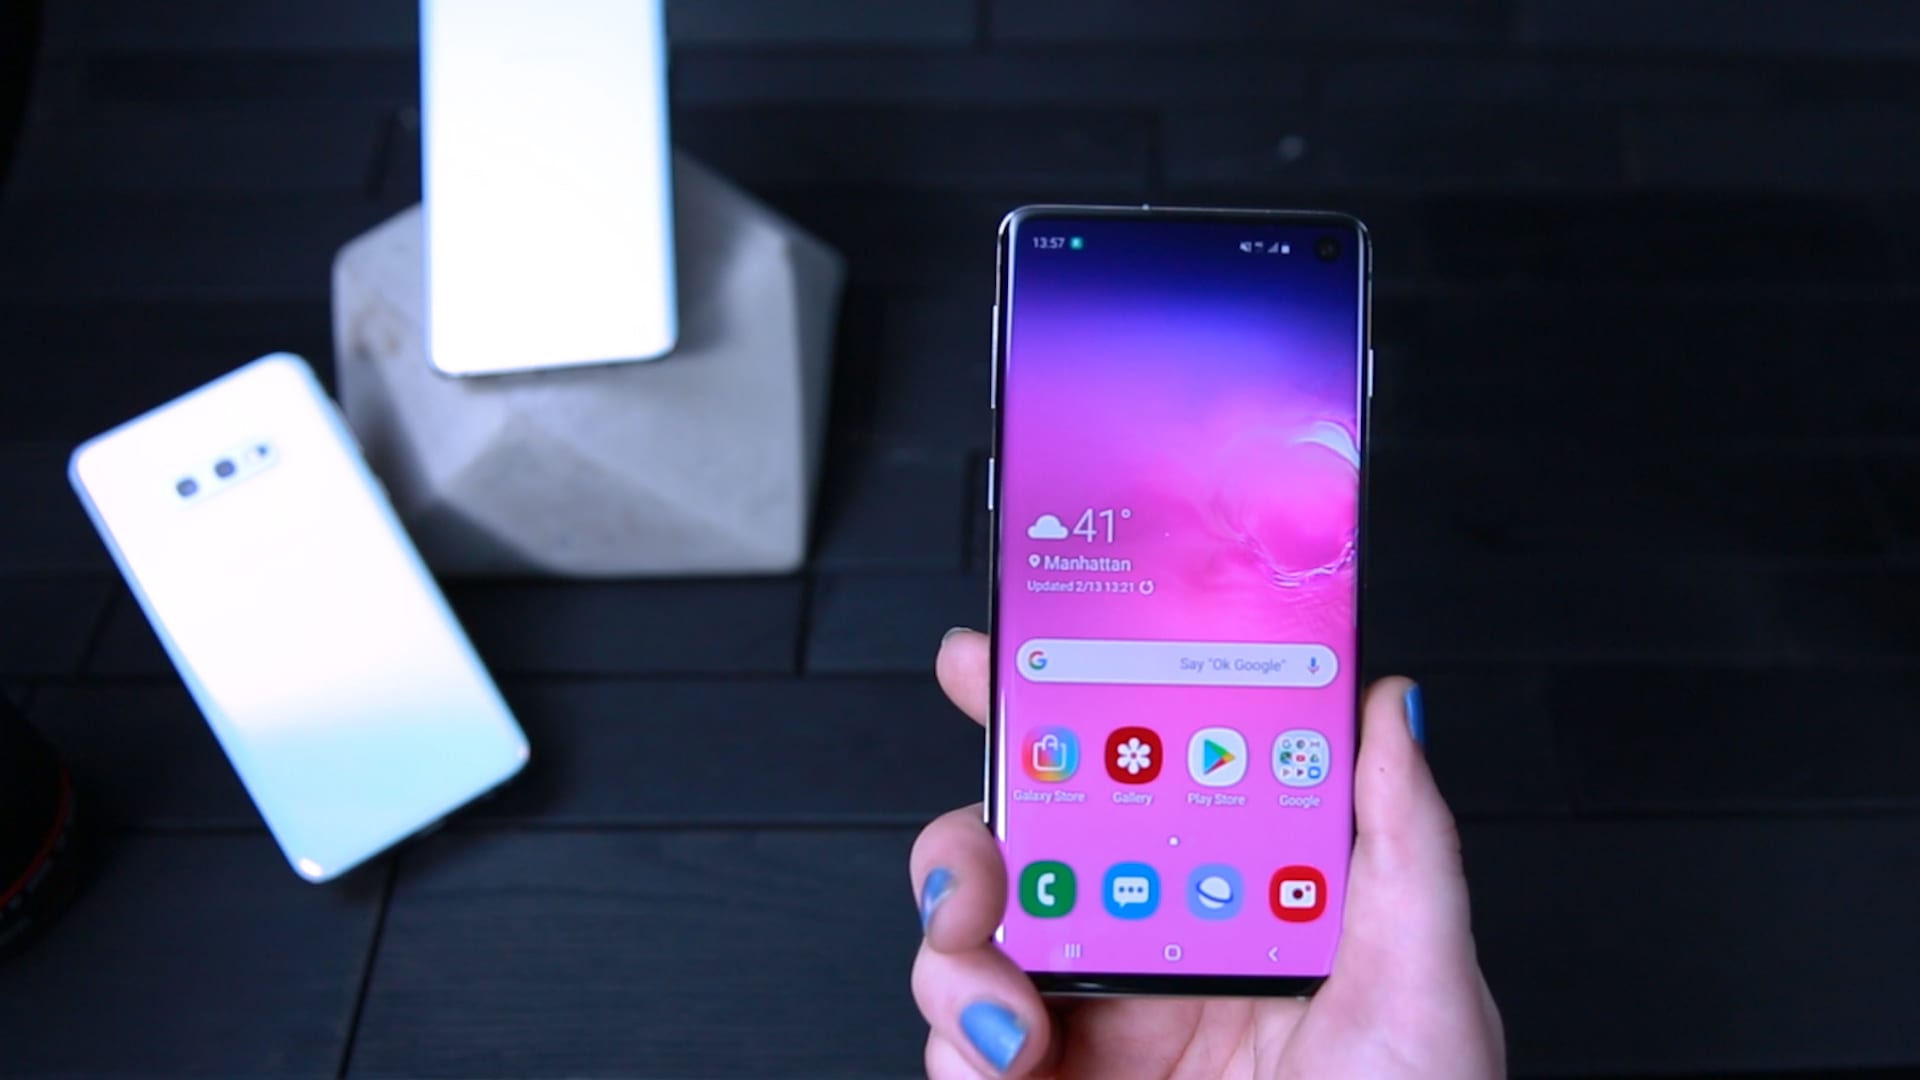 Samsung Galaxy S10 pictures, official photos